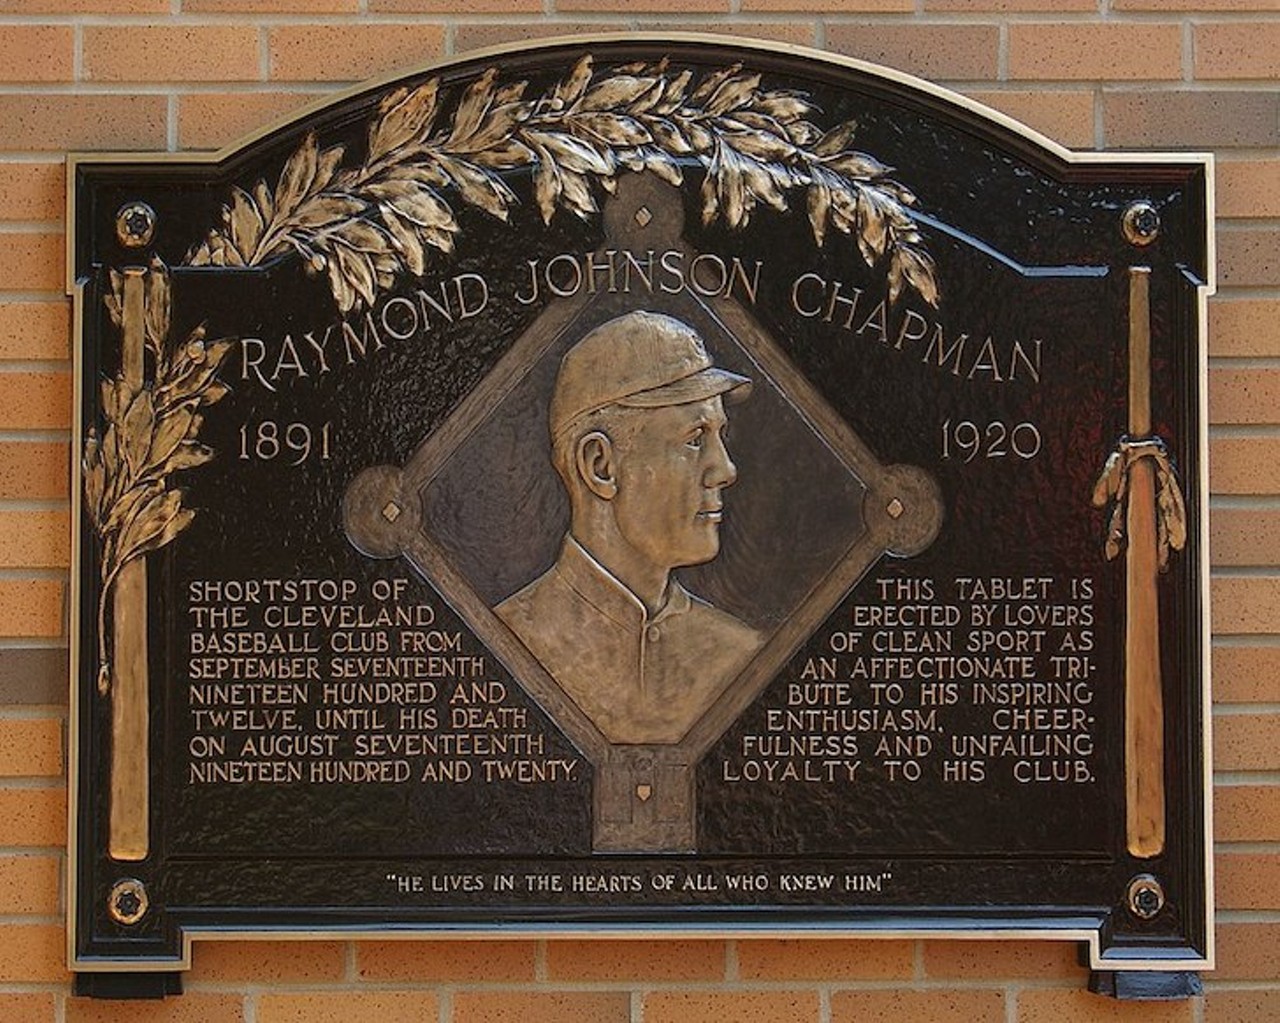 Raymond Johnson Chapman
Lakeview Cemetery
The only Major League Baseball player who died from being hit by a pitch, played for the Indians.
Photo via MamaGeek/Wikimedia Commons